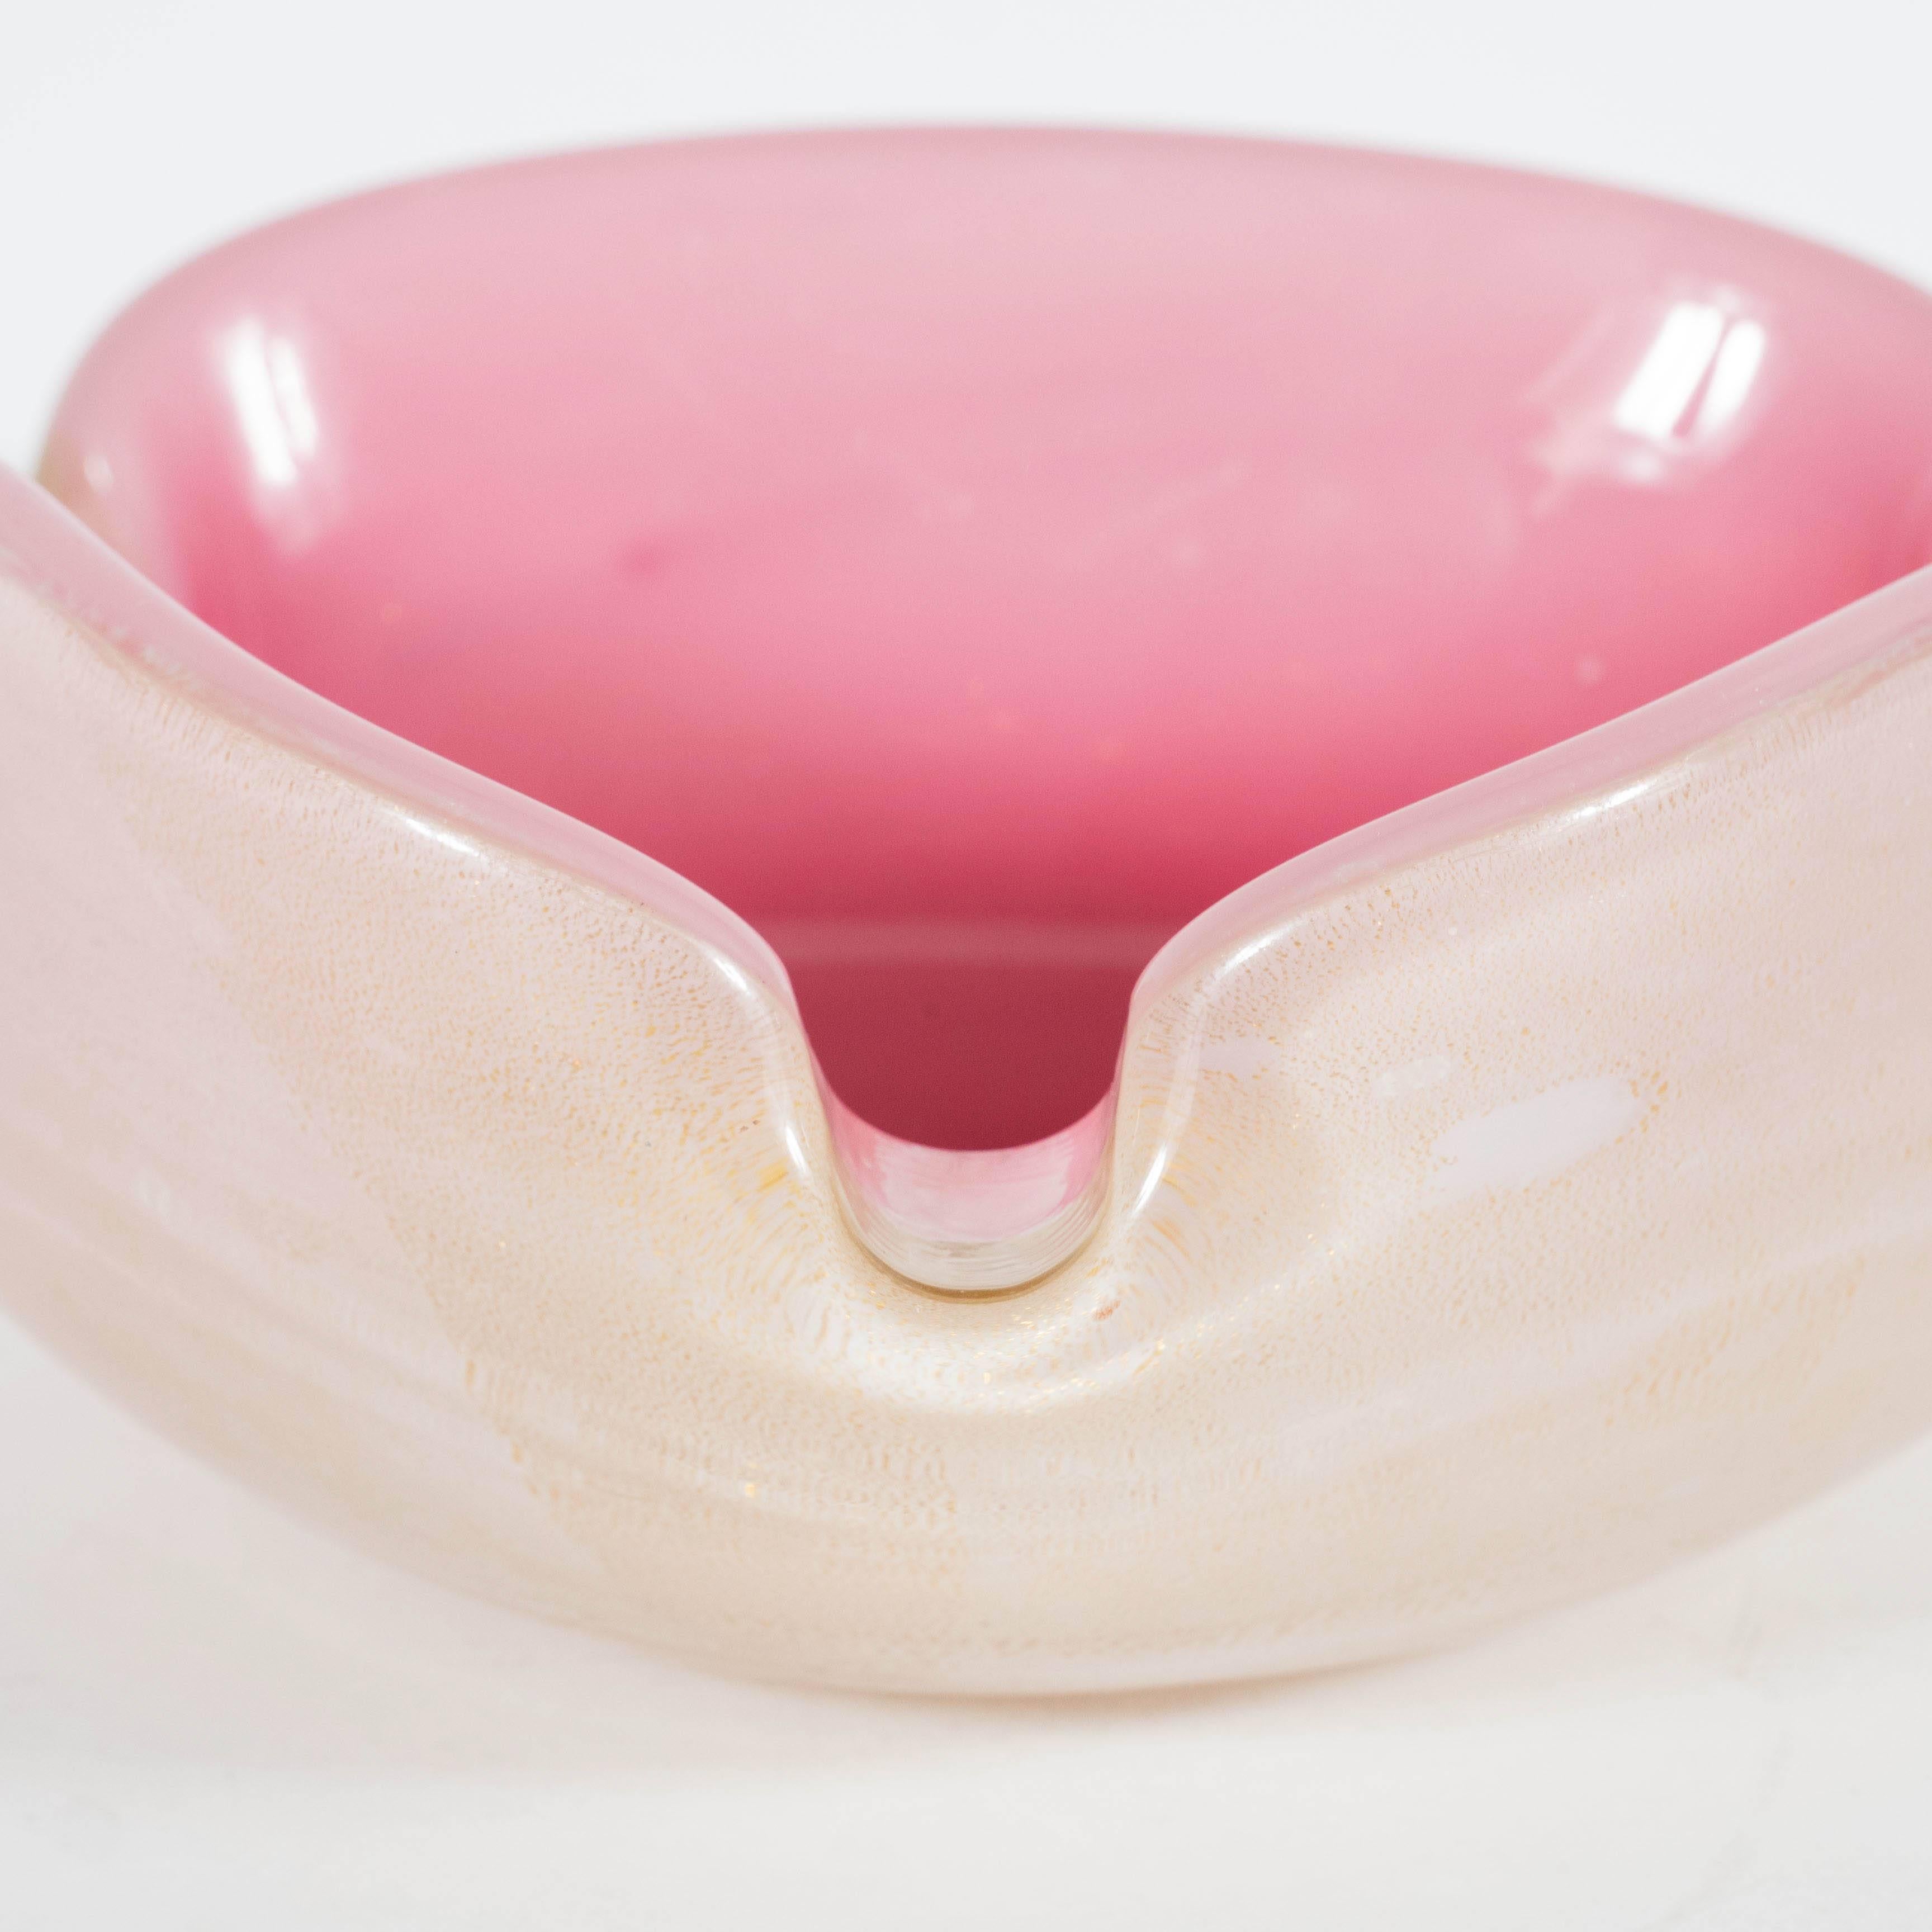 A Mid-Century modernist Bowl featuring a gradient of pink and rose hues with an outer shell adorned in suspended 24-karat gold flecks. A dark magenta center gradually lightens to a soft rose along the outer perimeter. The outside portion of the